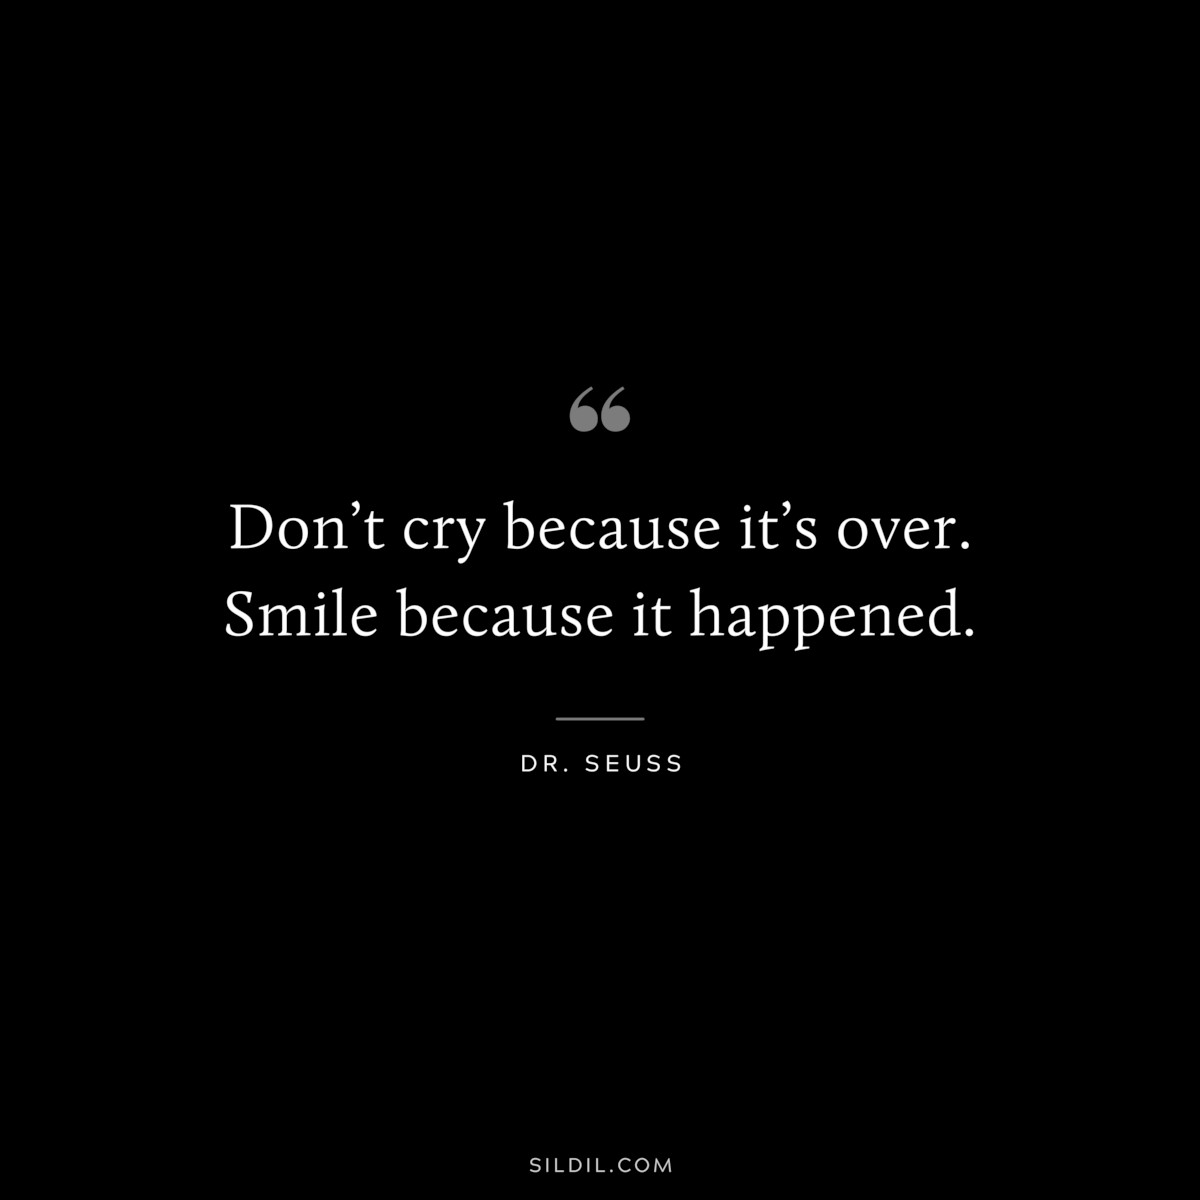 Don’t cry because it’s over. Smile because it happened. ― Dr. Seuss